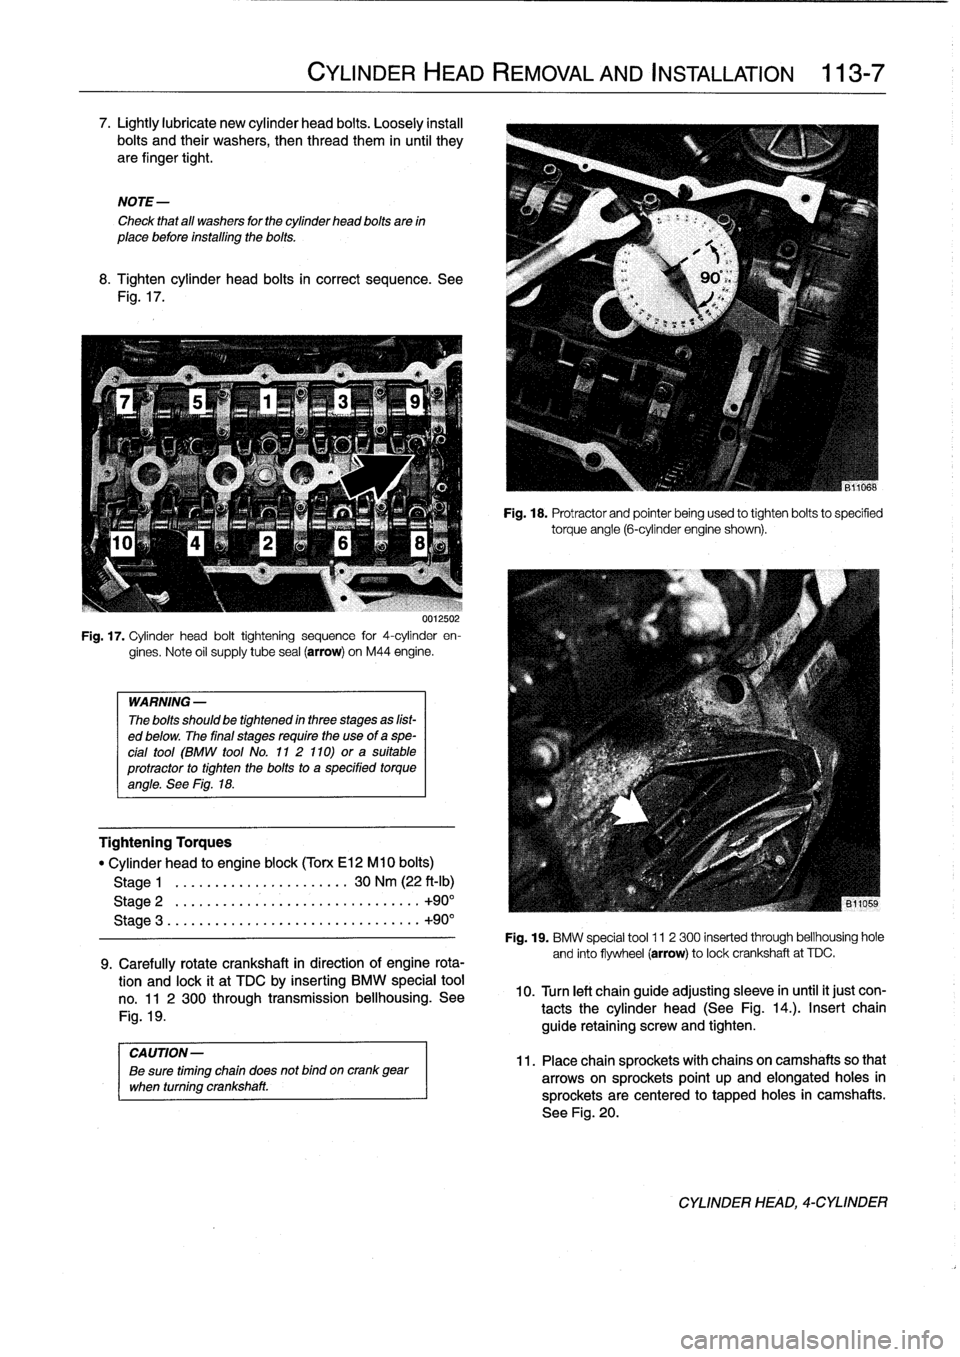 BMW 318i 1998 E36 Workshop Manual 
7
.
Lightly
lubricate
new
cylinder
head
bolts
.
Loosely
instan
bolts
and
their
washers,
then
thread
them
in
until
they
are
finger
tight
.

NOTE-

Check
that
all
washers
for
the
cylinder
head
bolts
ar